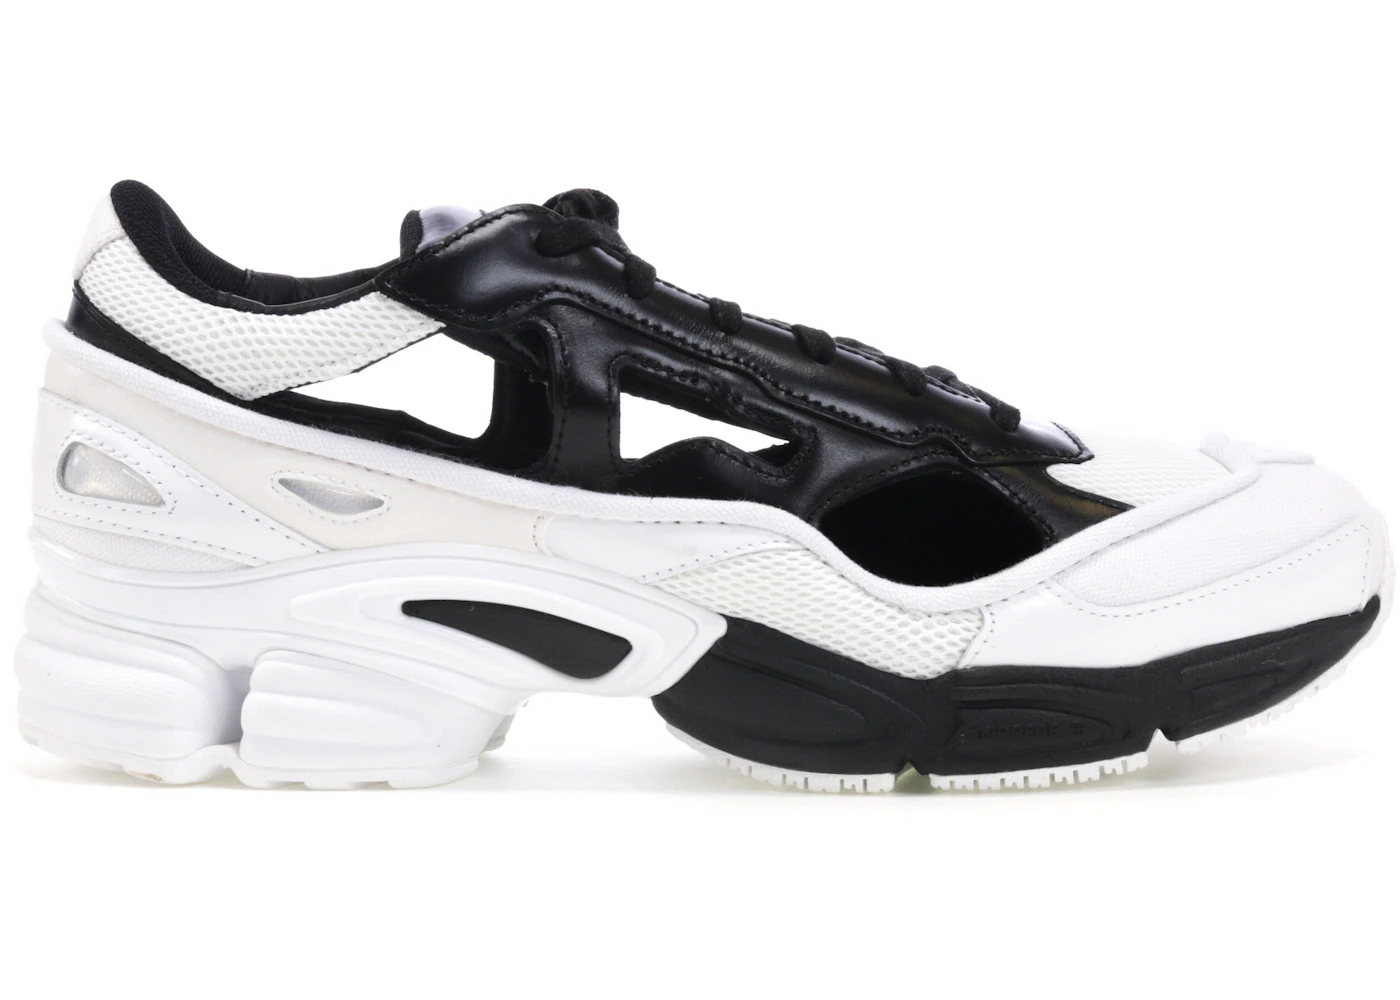 Mosque Join Affirm adidas RS Replicant Ozweego Raf Simons Black Cream - BB7988 - US